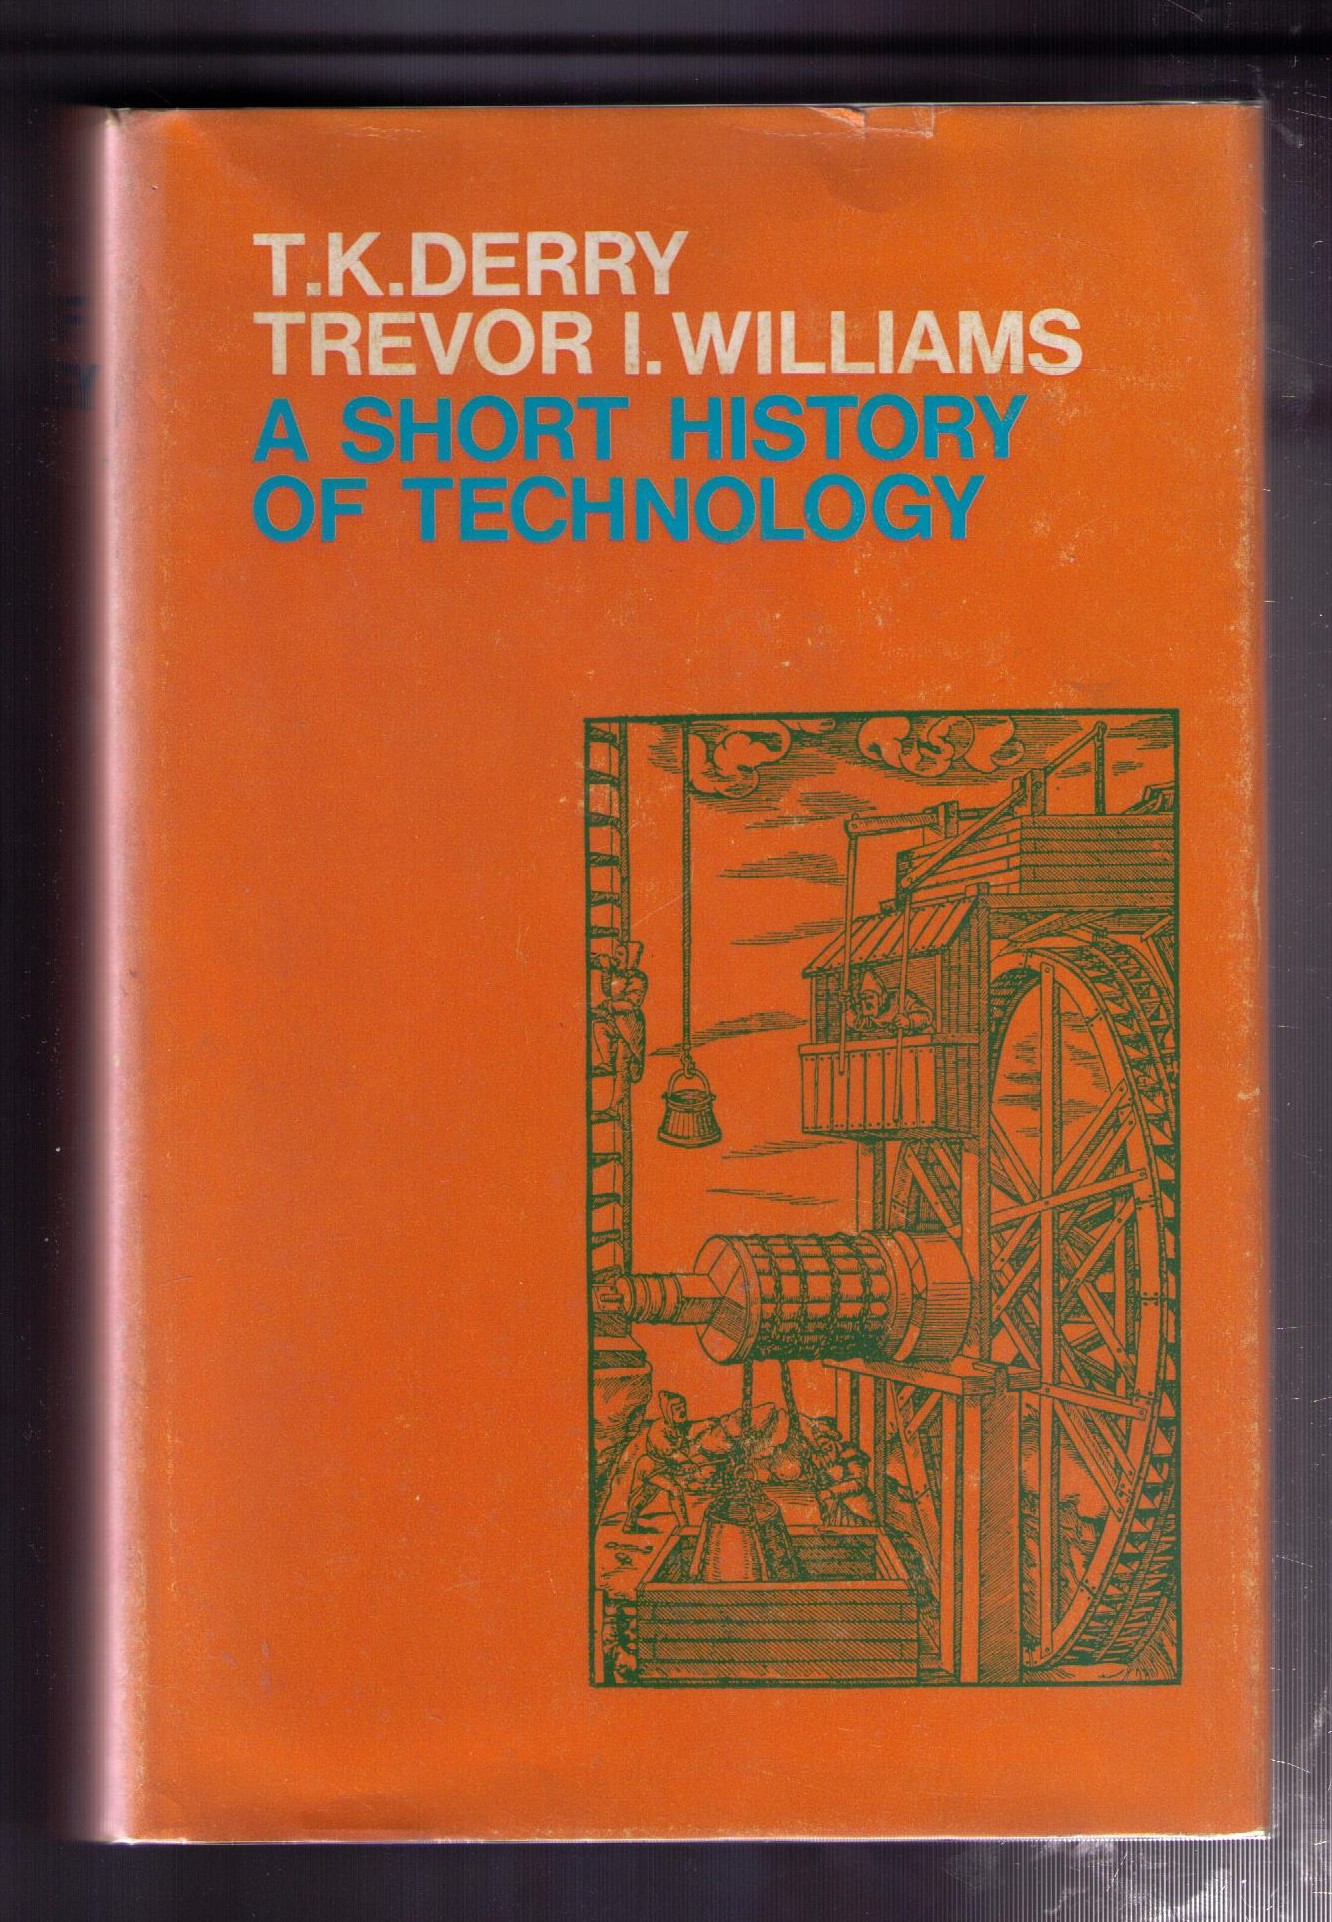 A Short History of Technology from the Earliest Times to A.D.1900 - Derry, T. K.; Williams, Trevor I.